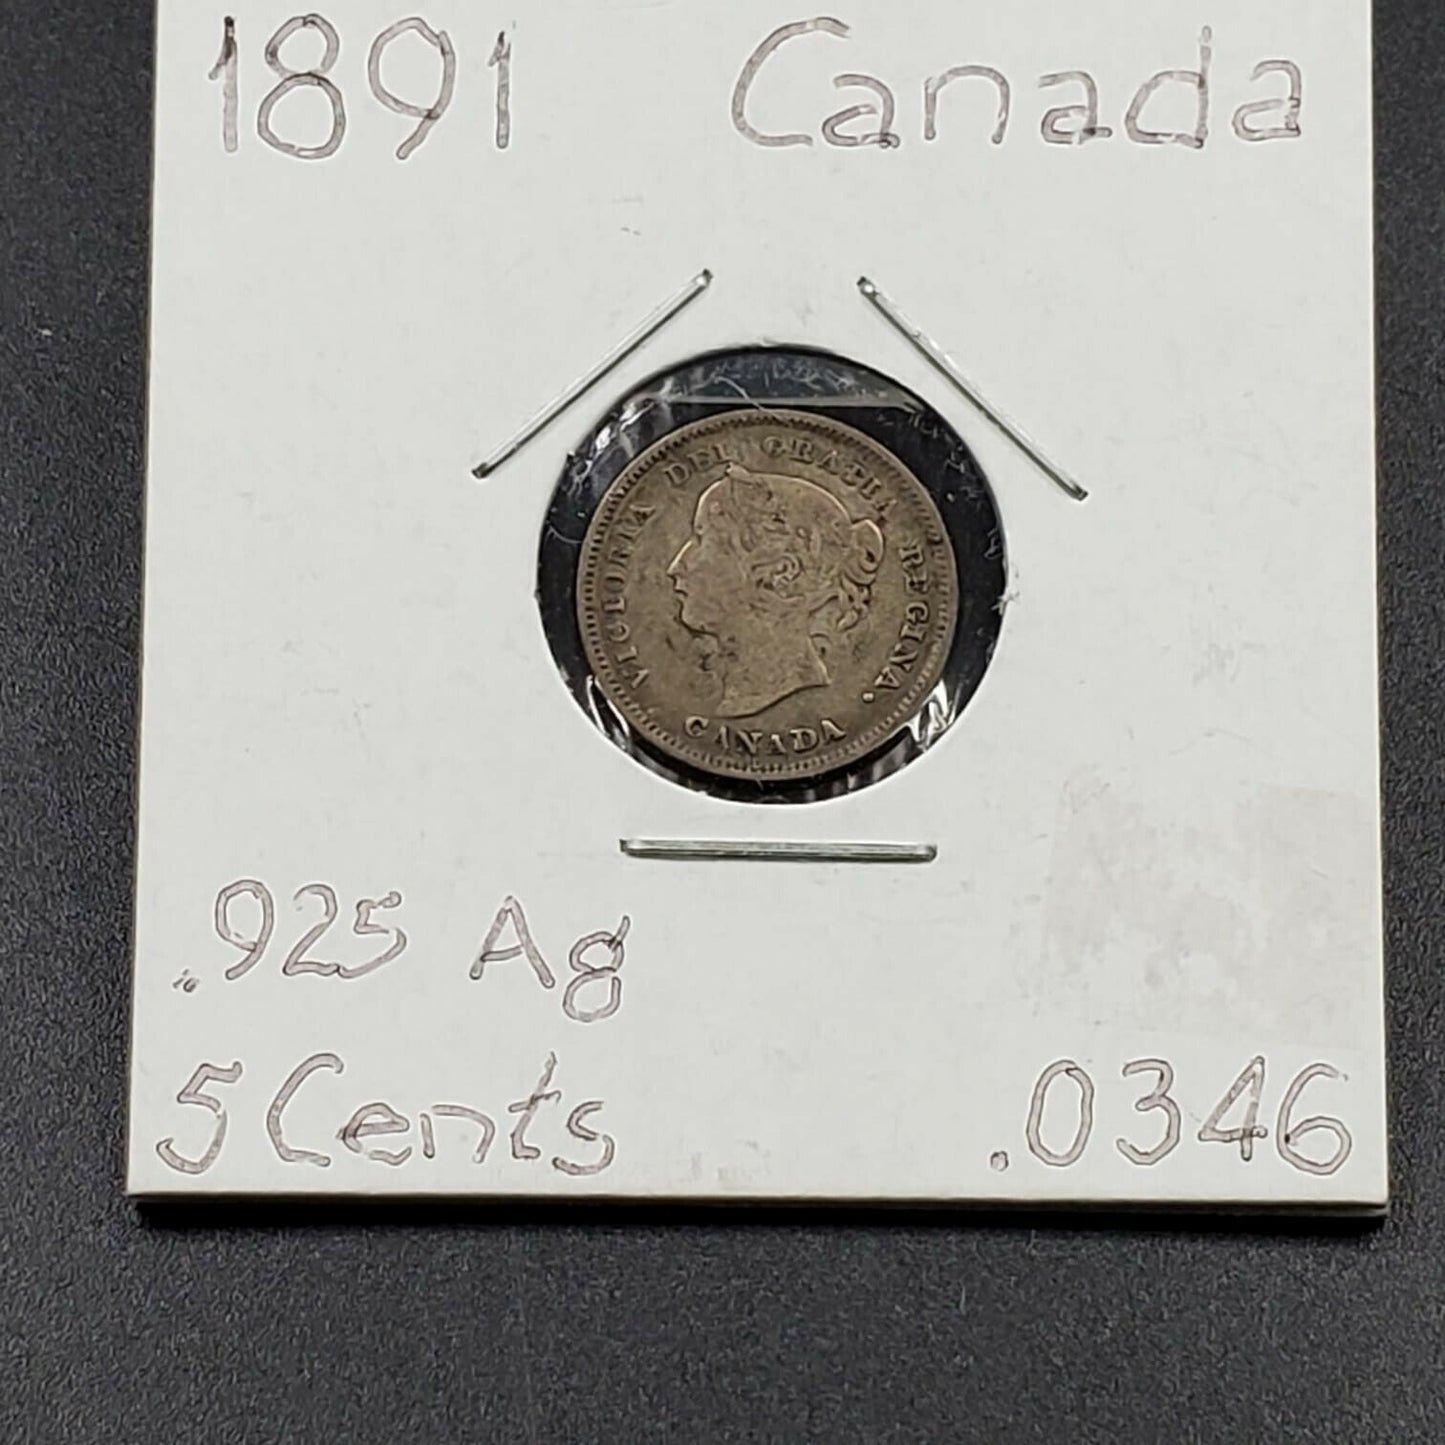 1891 Canada 5c 5 Cents Silver Nickel Coin Choice Fine Circulated